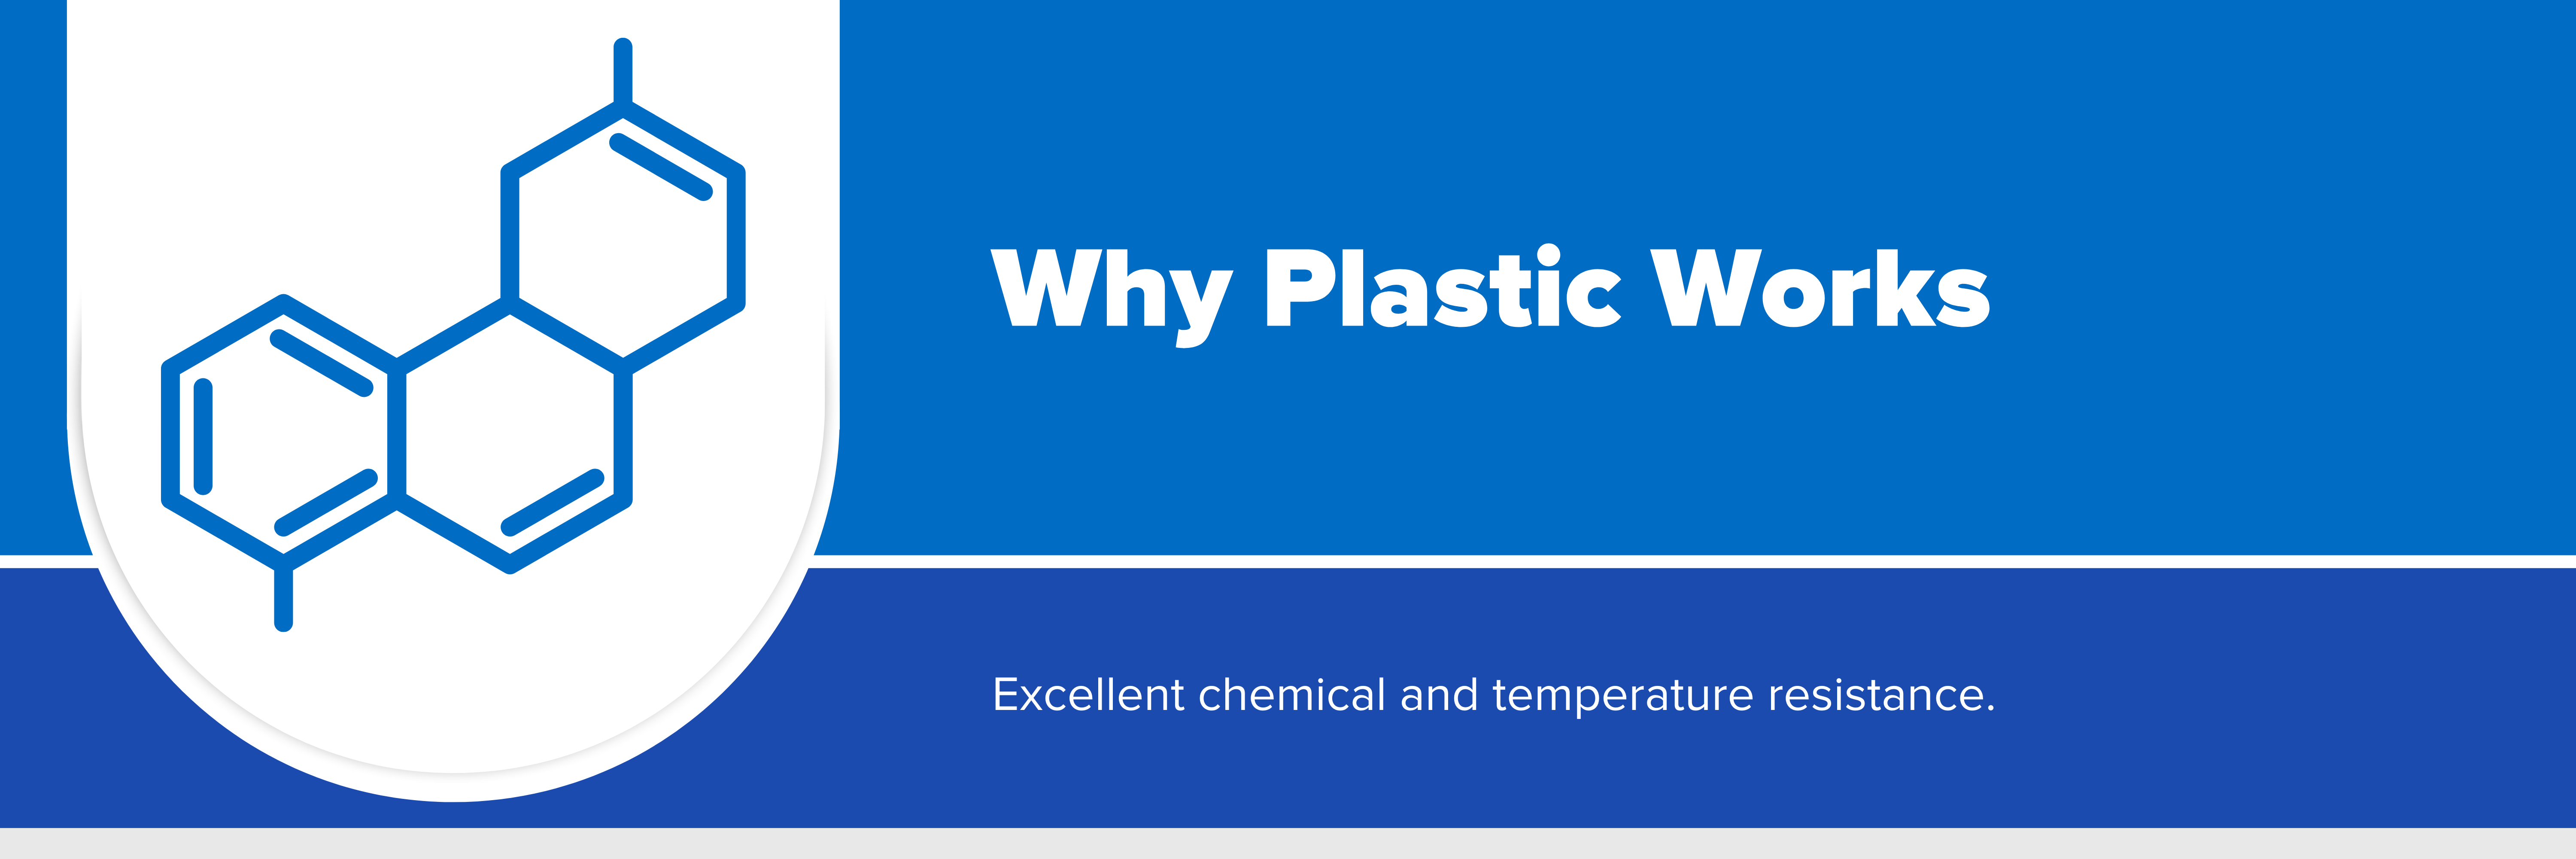 Header image with text "Plastic Works"